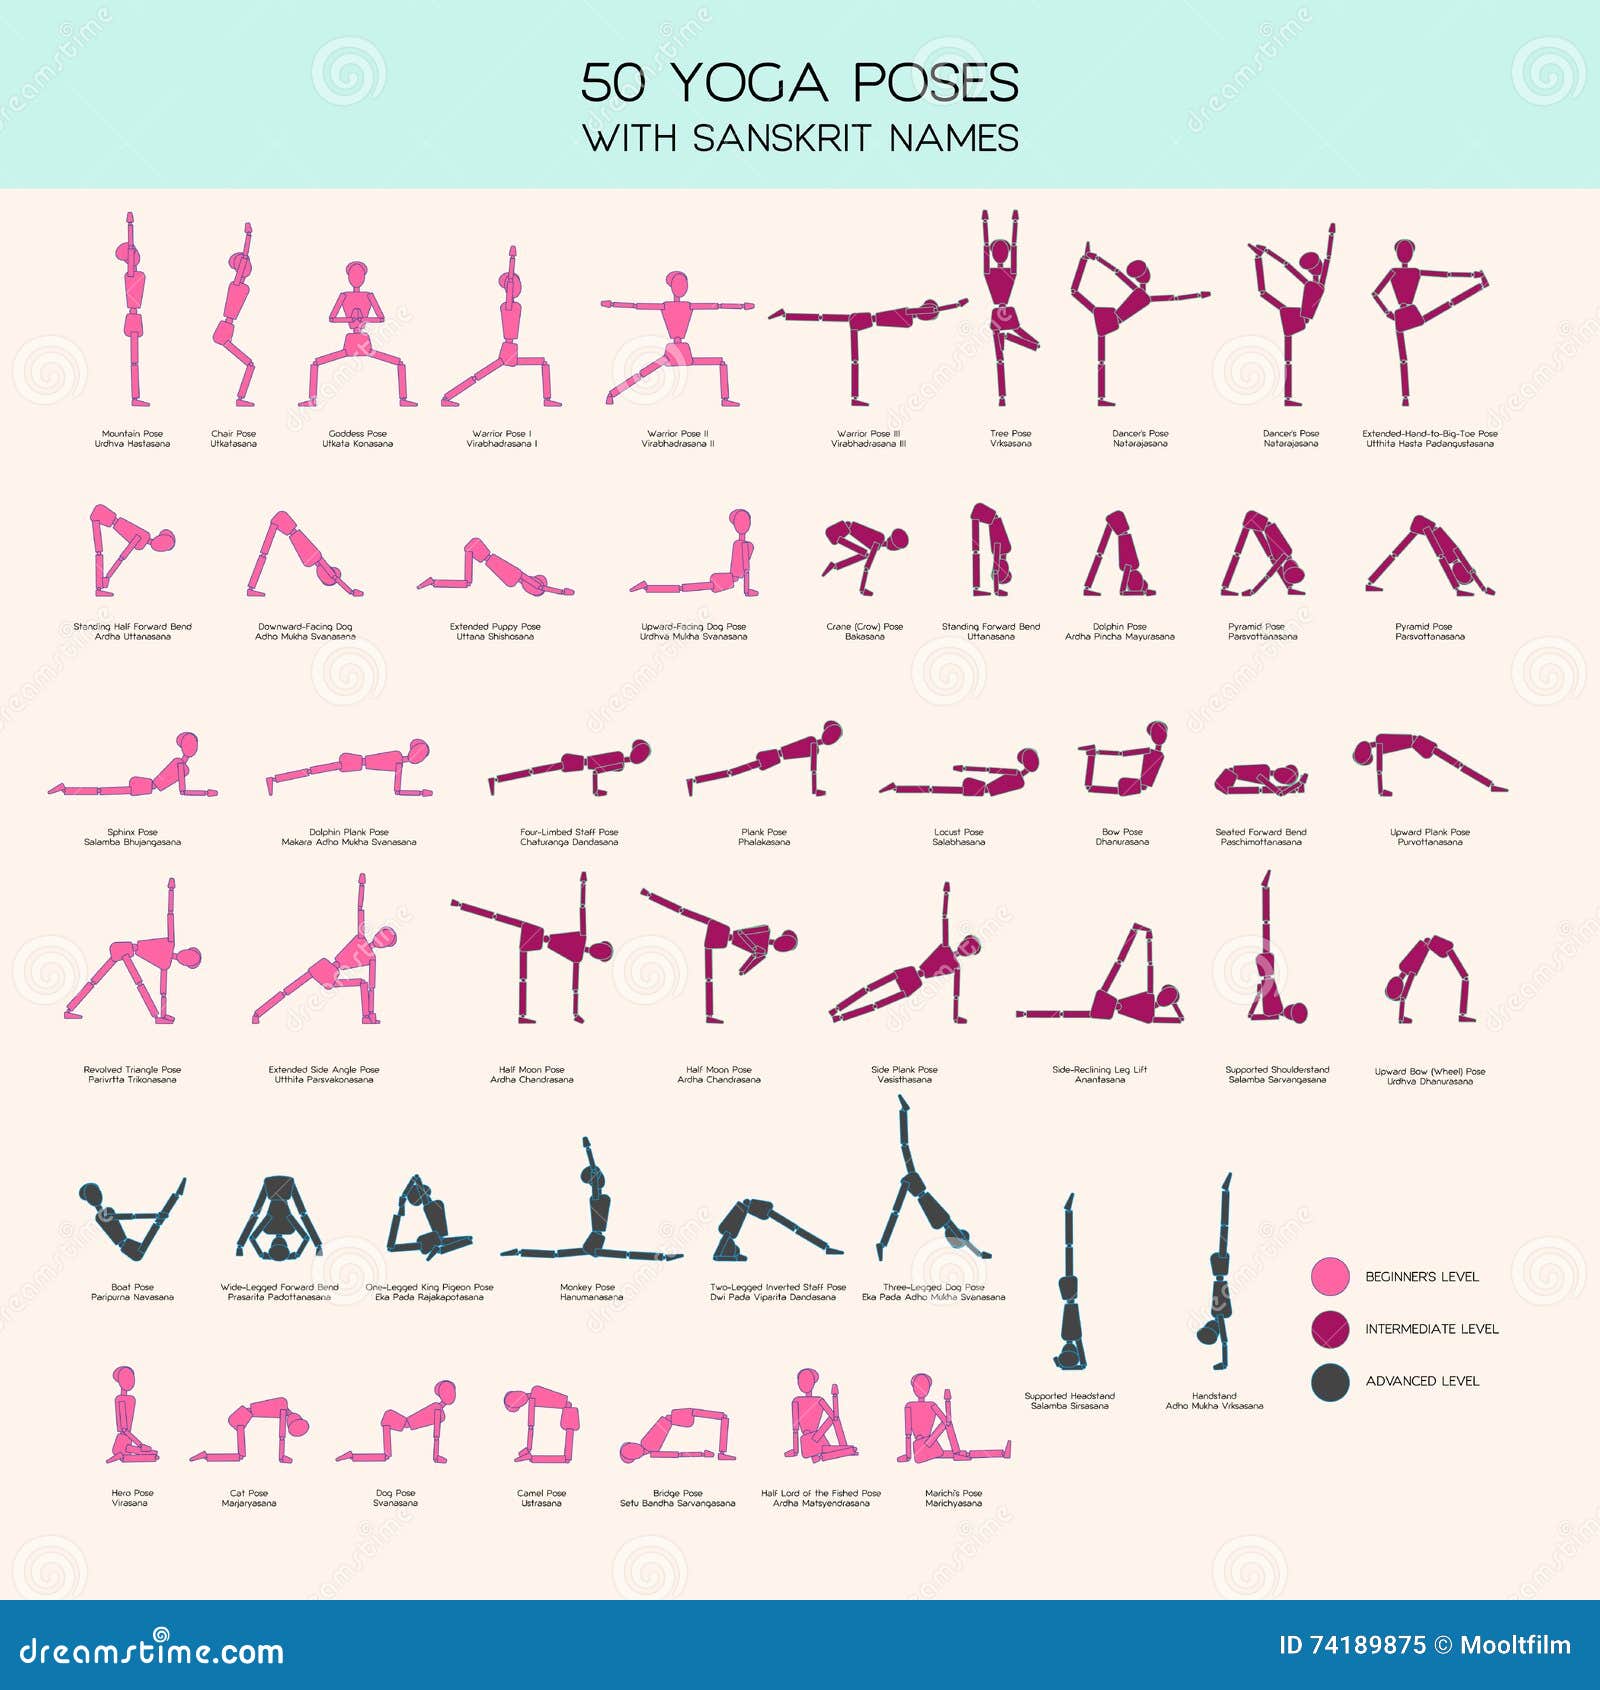 108 Hatha Yoga Poses With Stick Figures - Yoga Paper